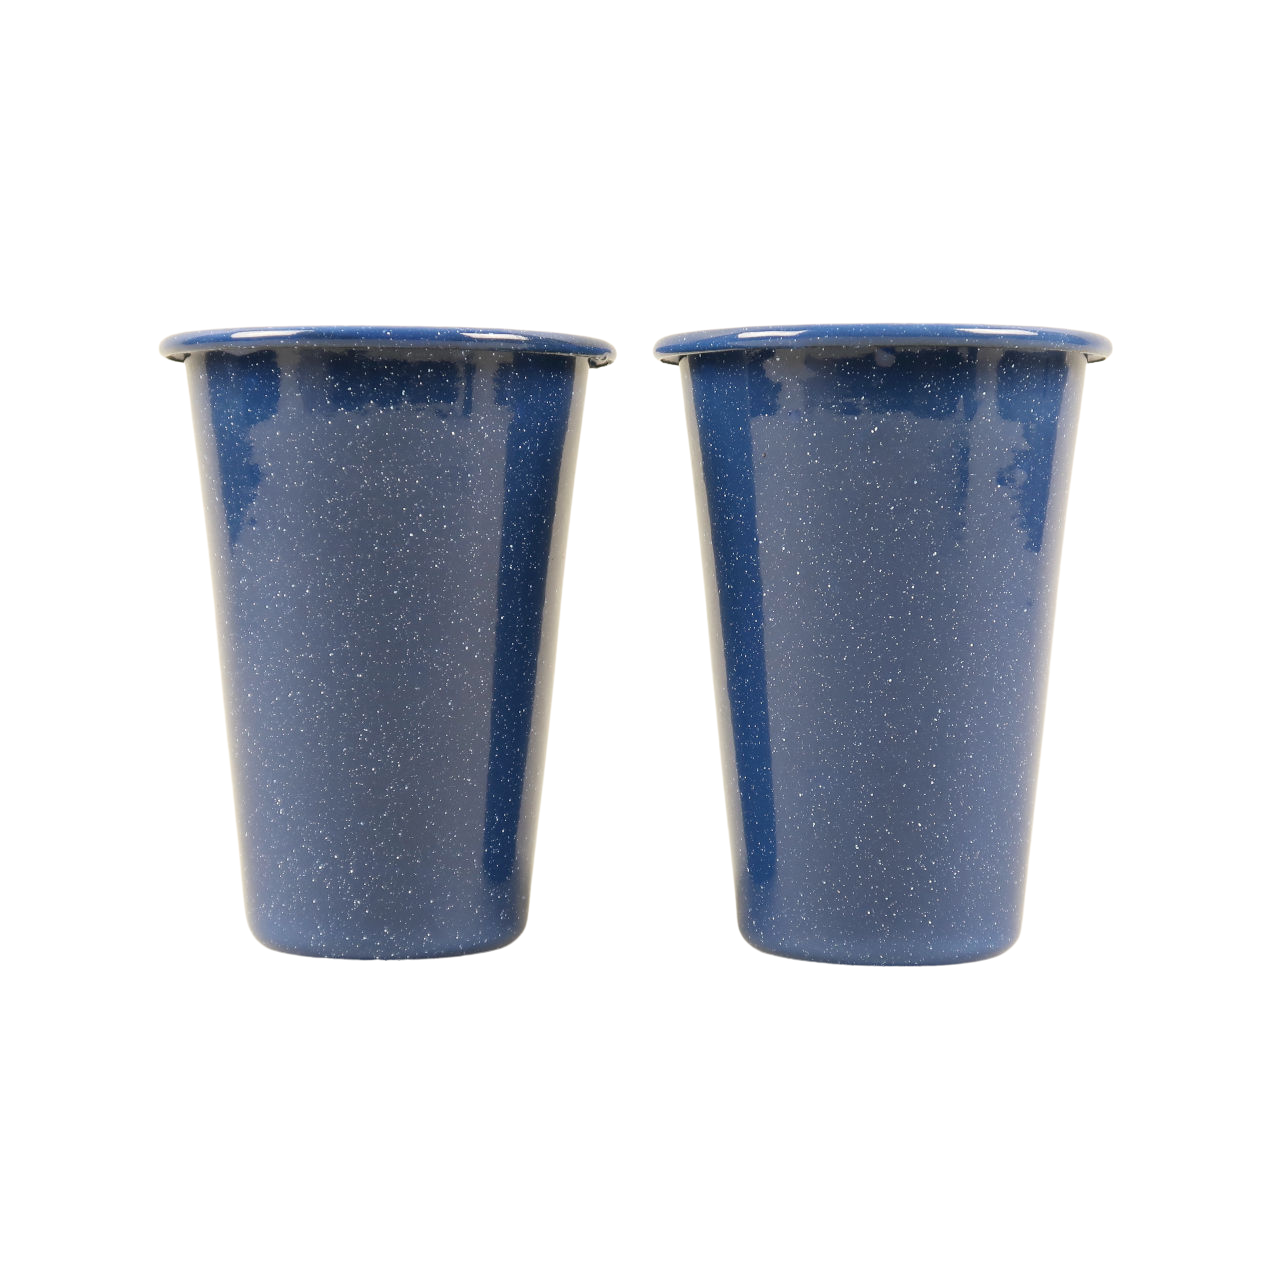 Crow Canyon Home Set of 2 Speckled Enamel Beakers - Blue